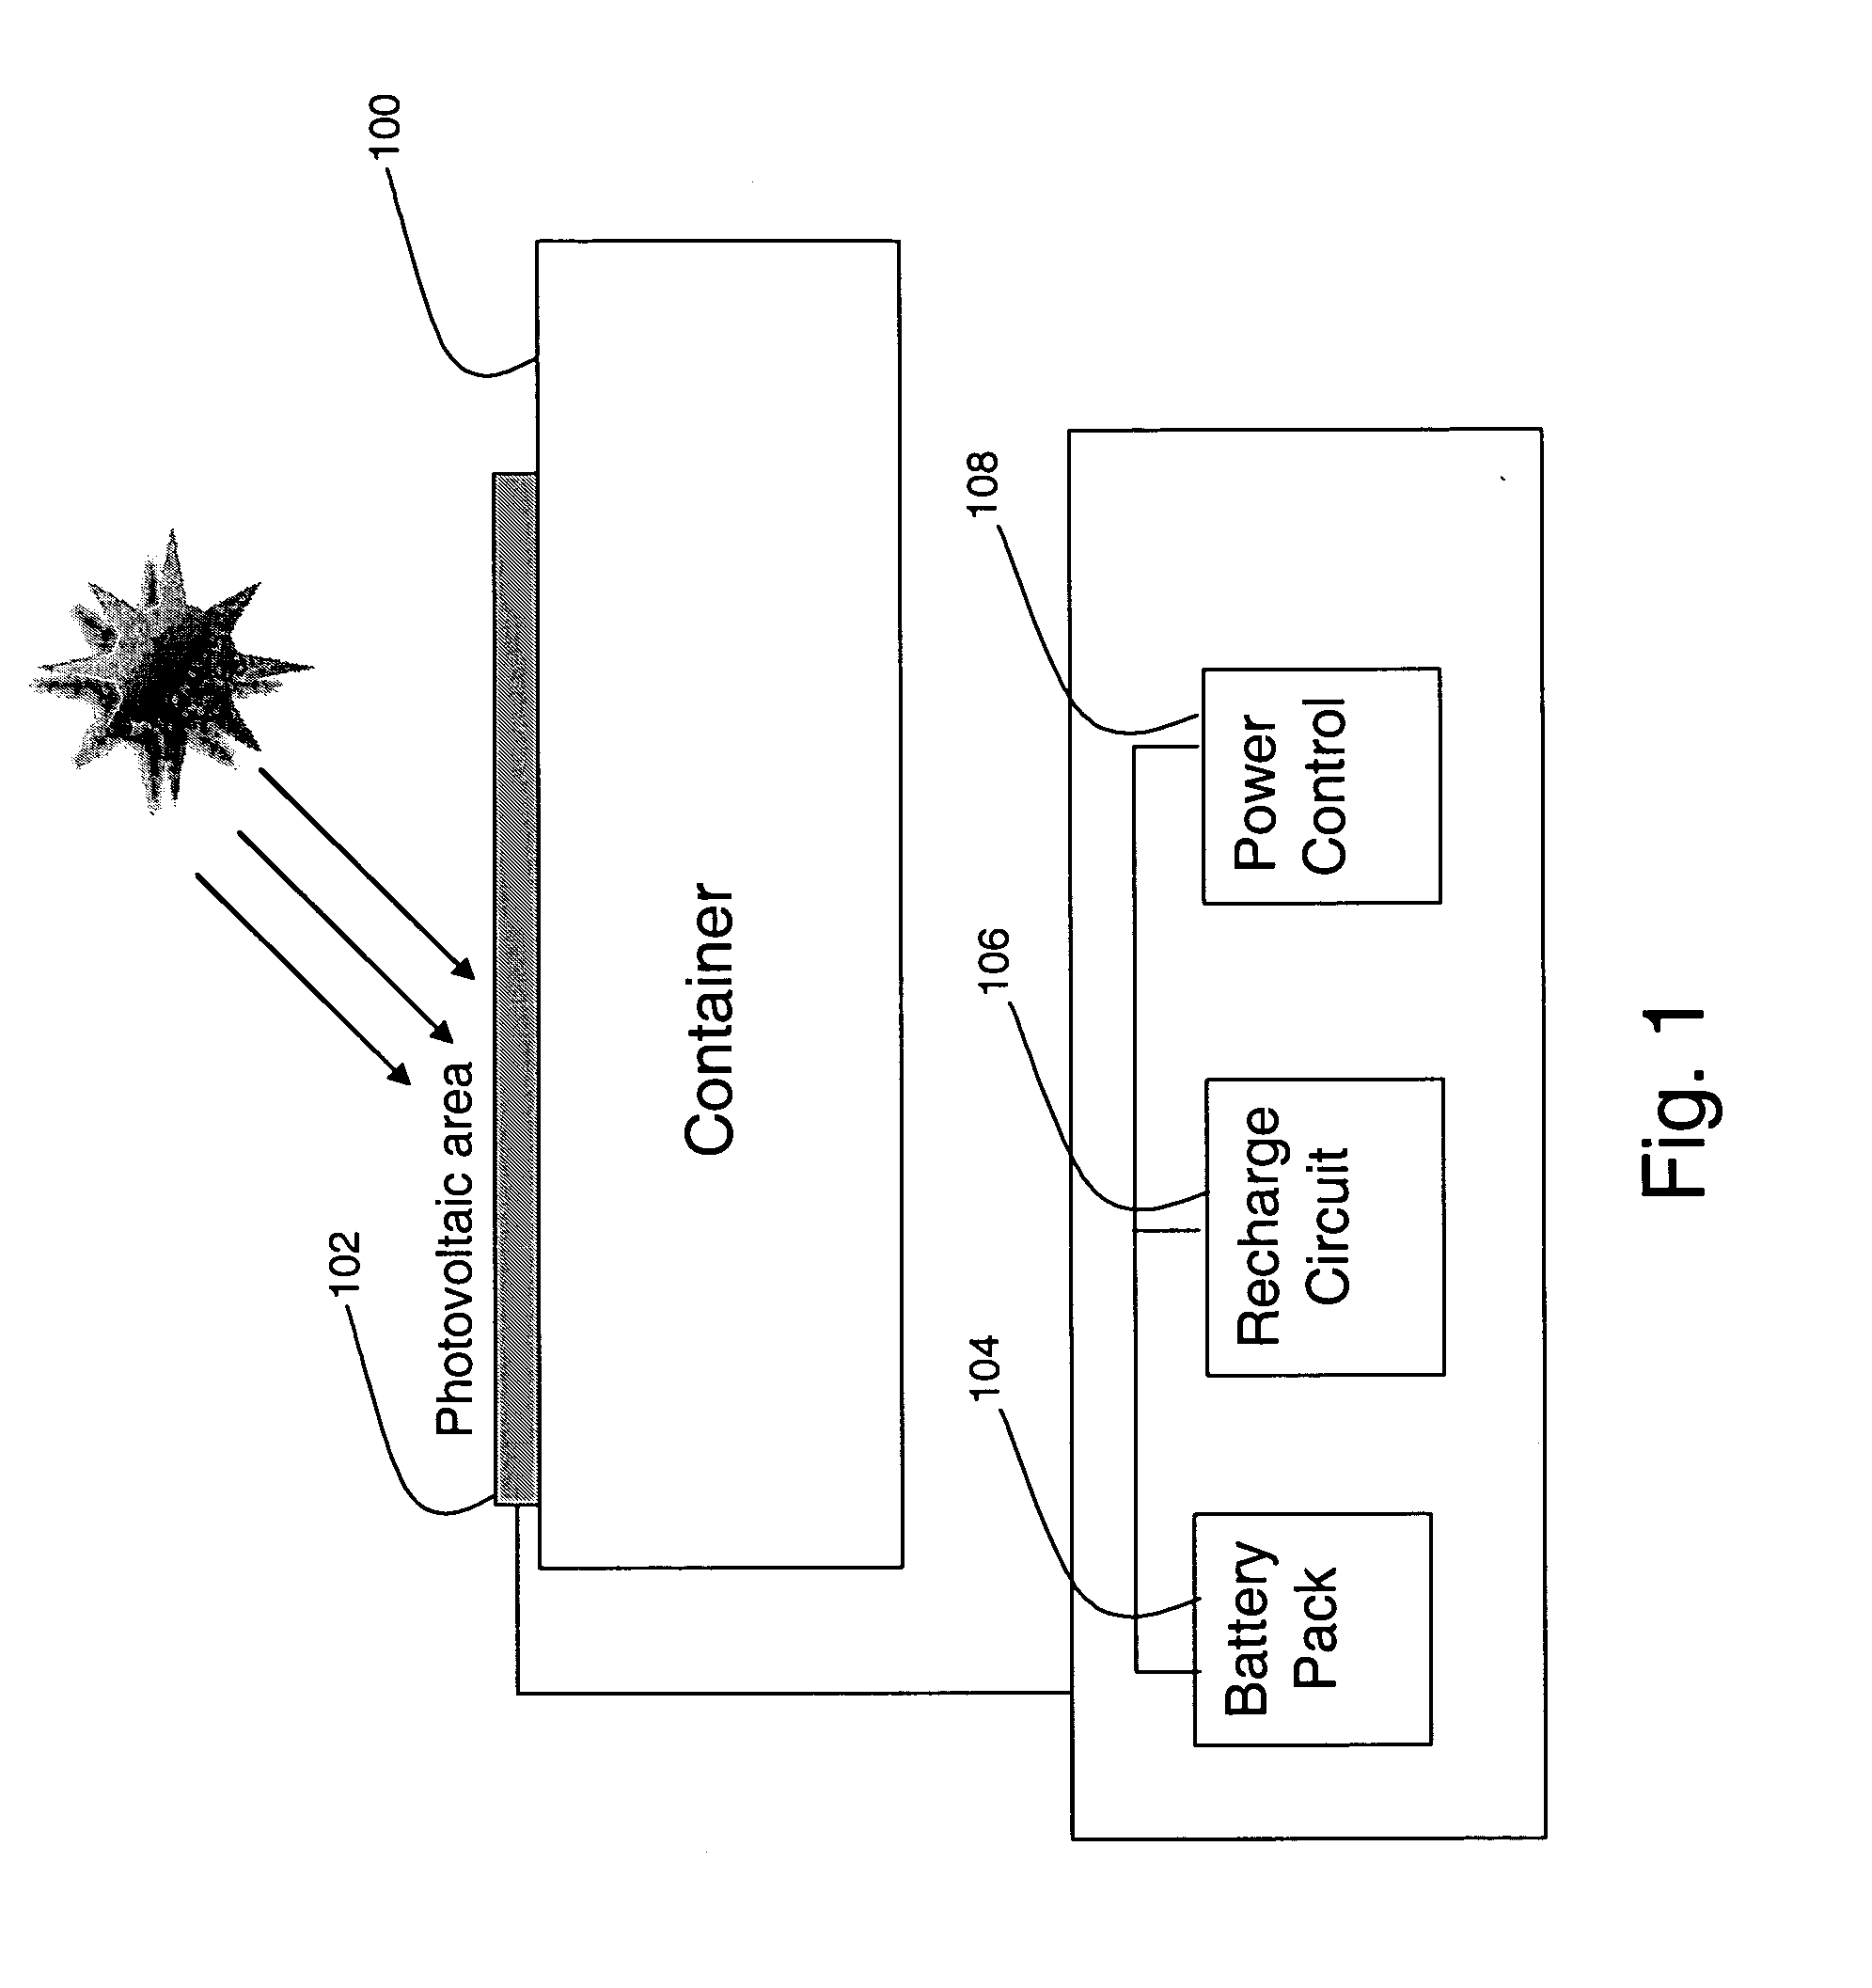 System and method for rechargeable power system for a cargo container monitoring and security system